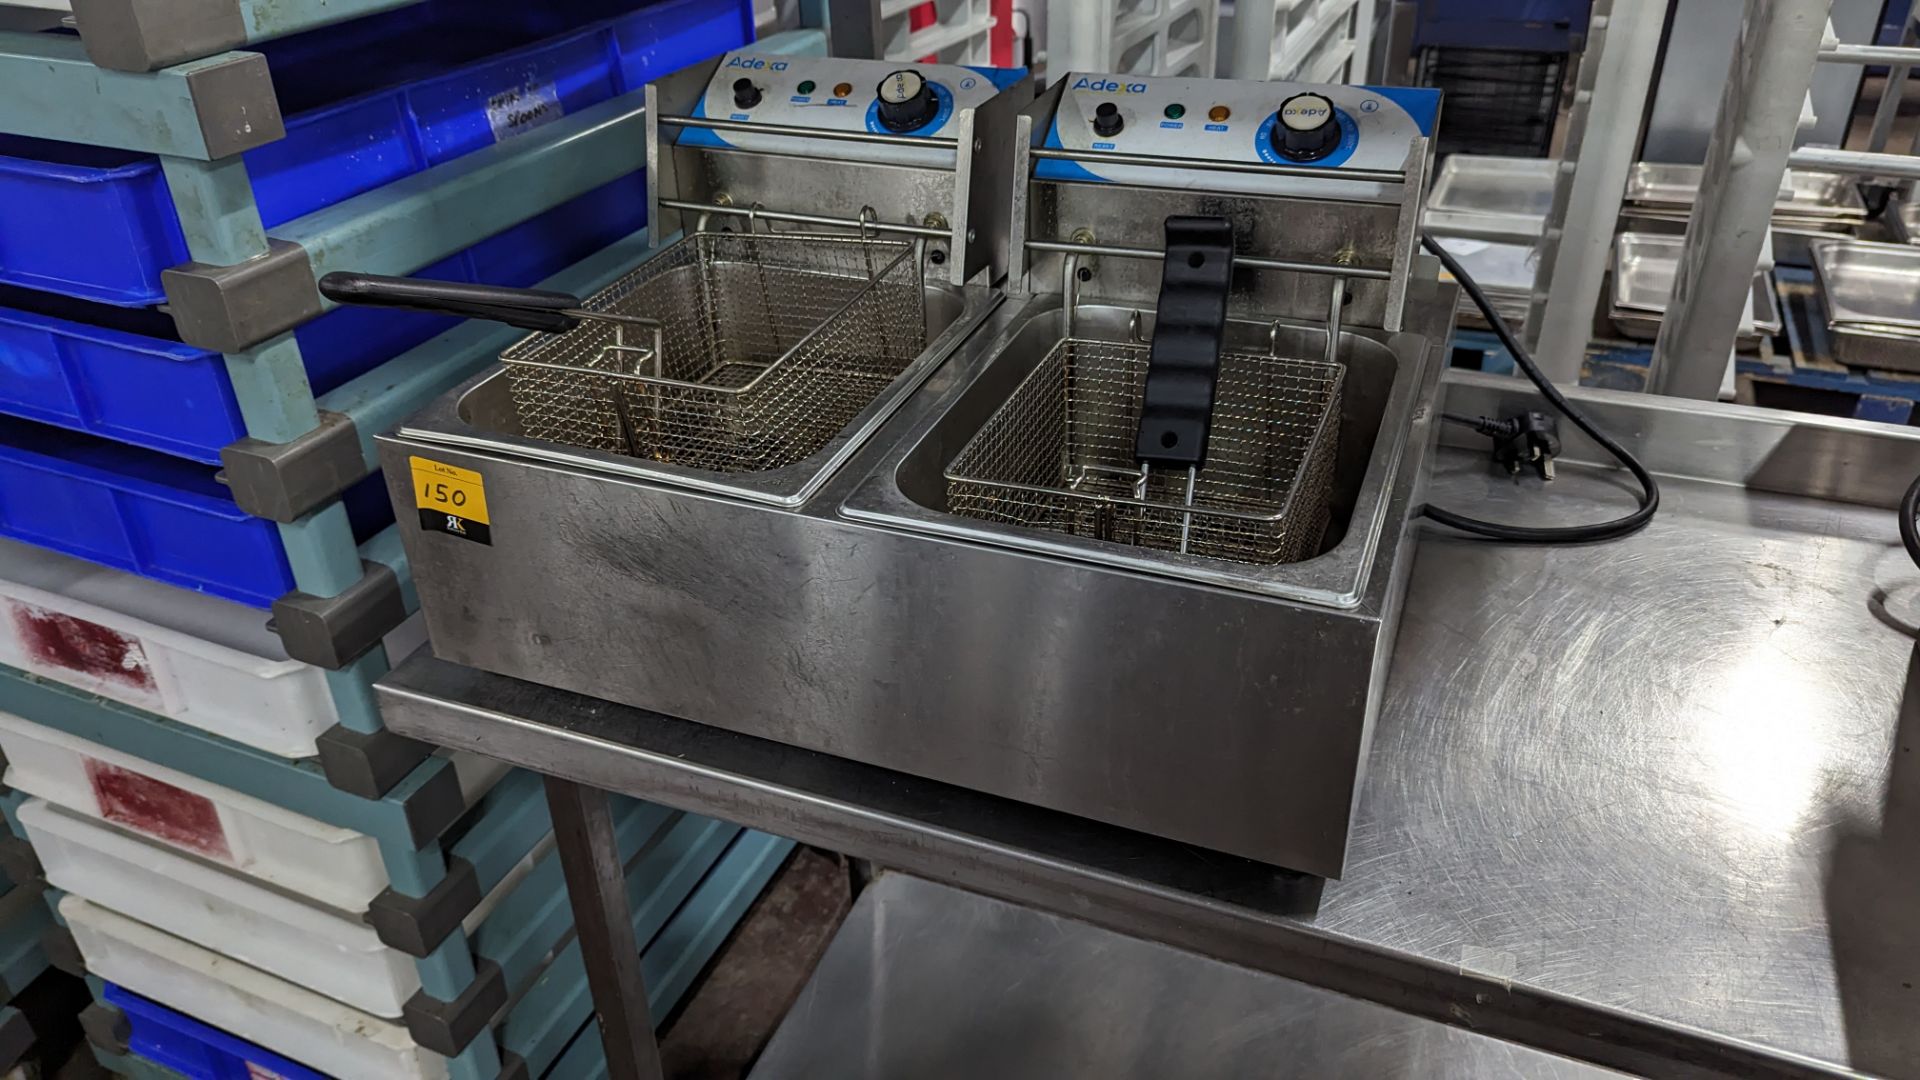 Adexa stainless steel tabletop twin well deep fat fryer - Image 2 of 7